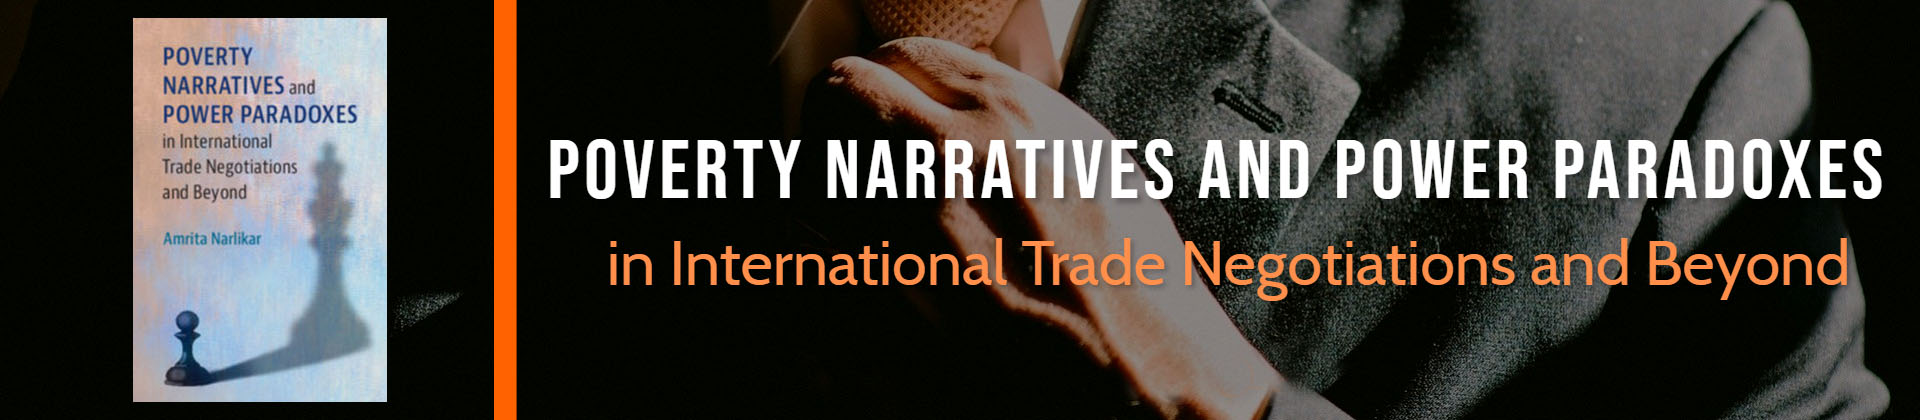 Book Discussion | Poverty Narratives and Power Paradoxes in International Trade Negotiations and Beyond